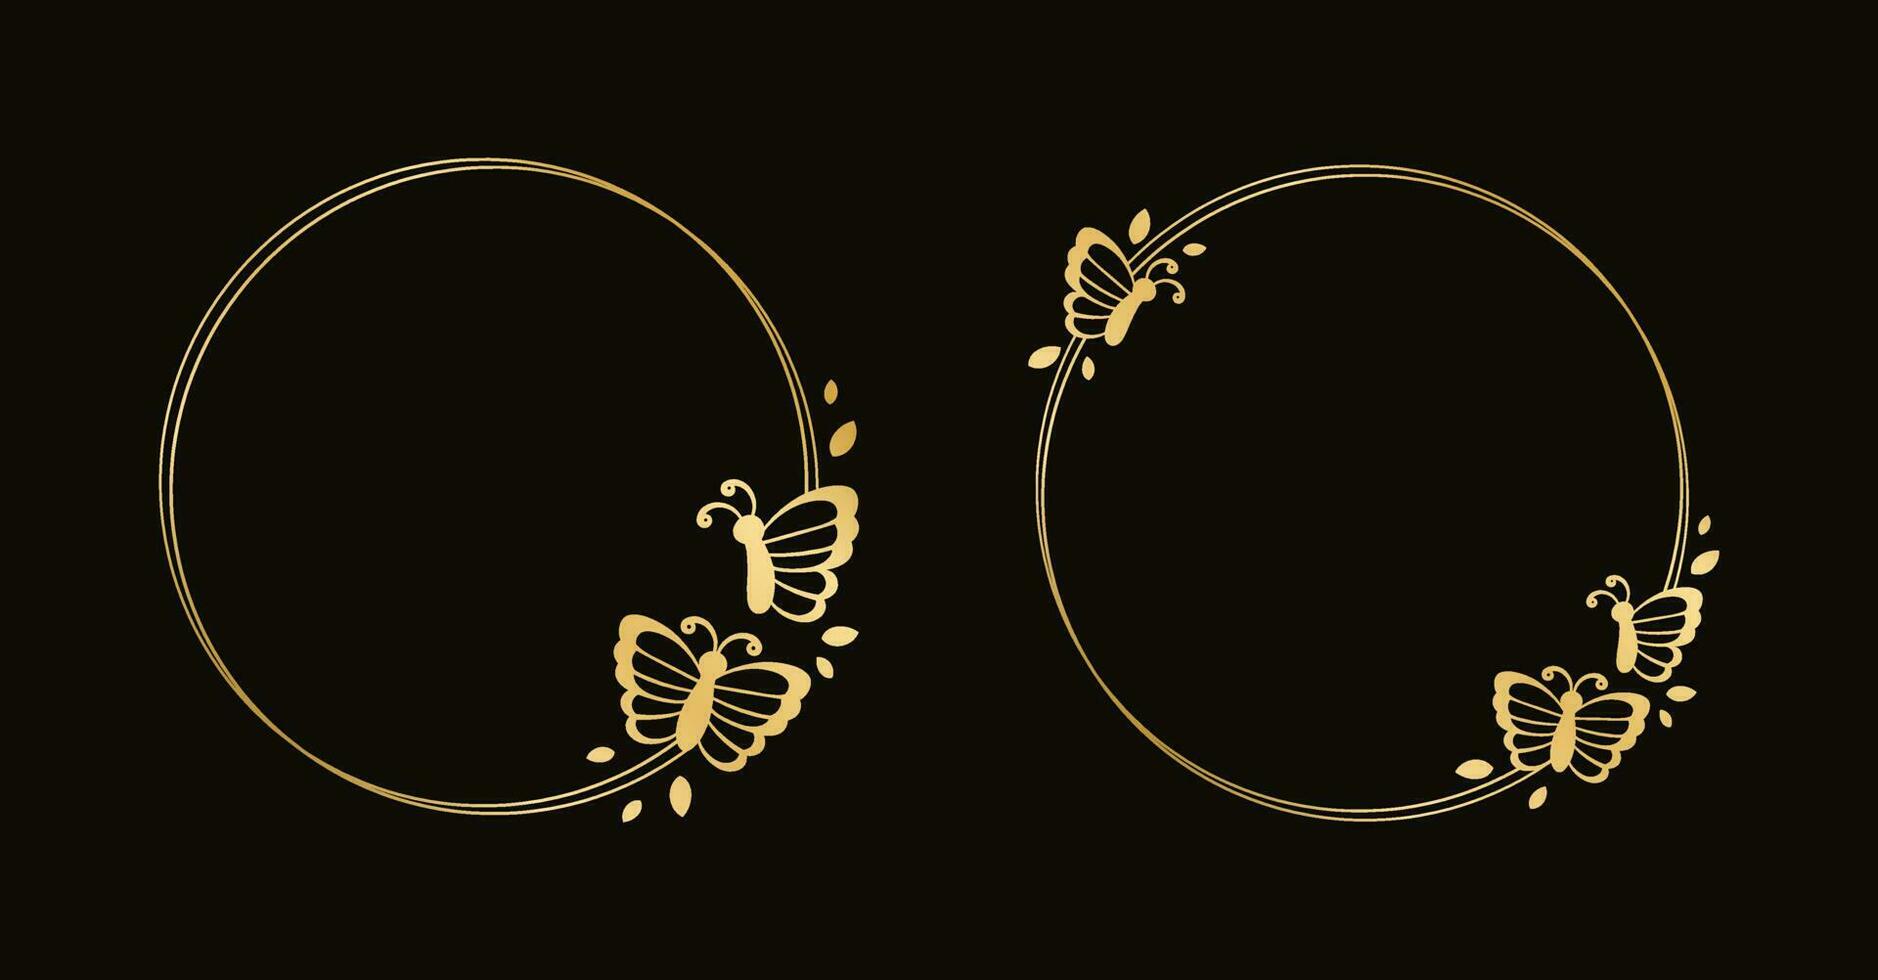 Round gold frame with butterflies silhouette vector illustration set. Abstract golden border for spring summer elegant design elements